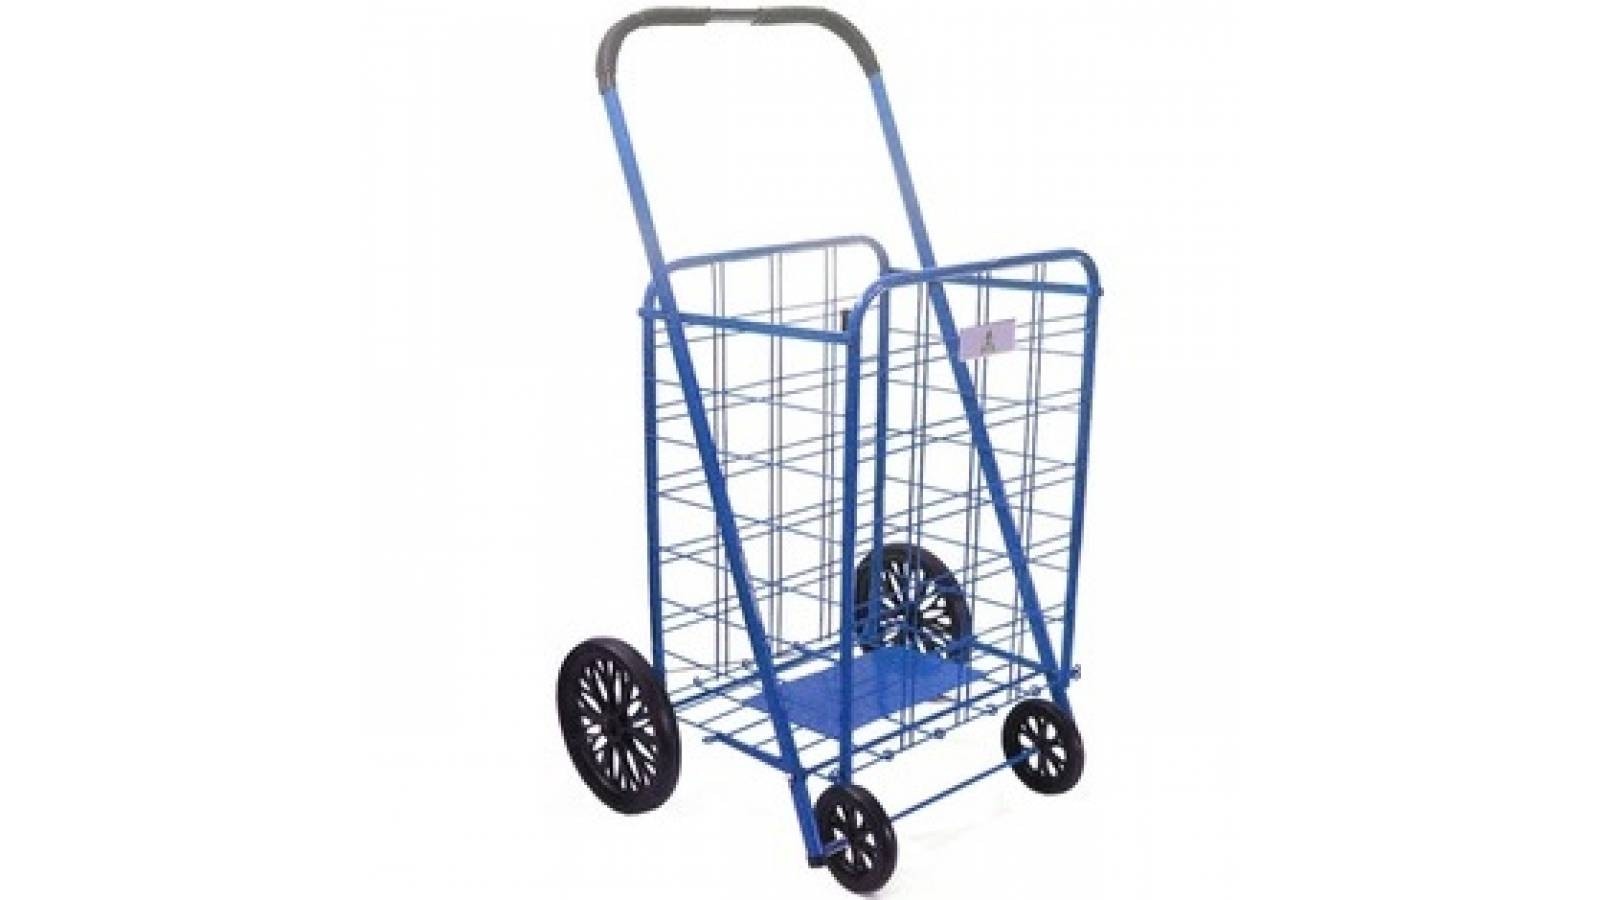 42" Shopping Cart with Rounded Handle